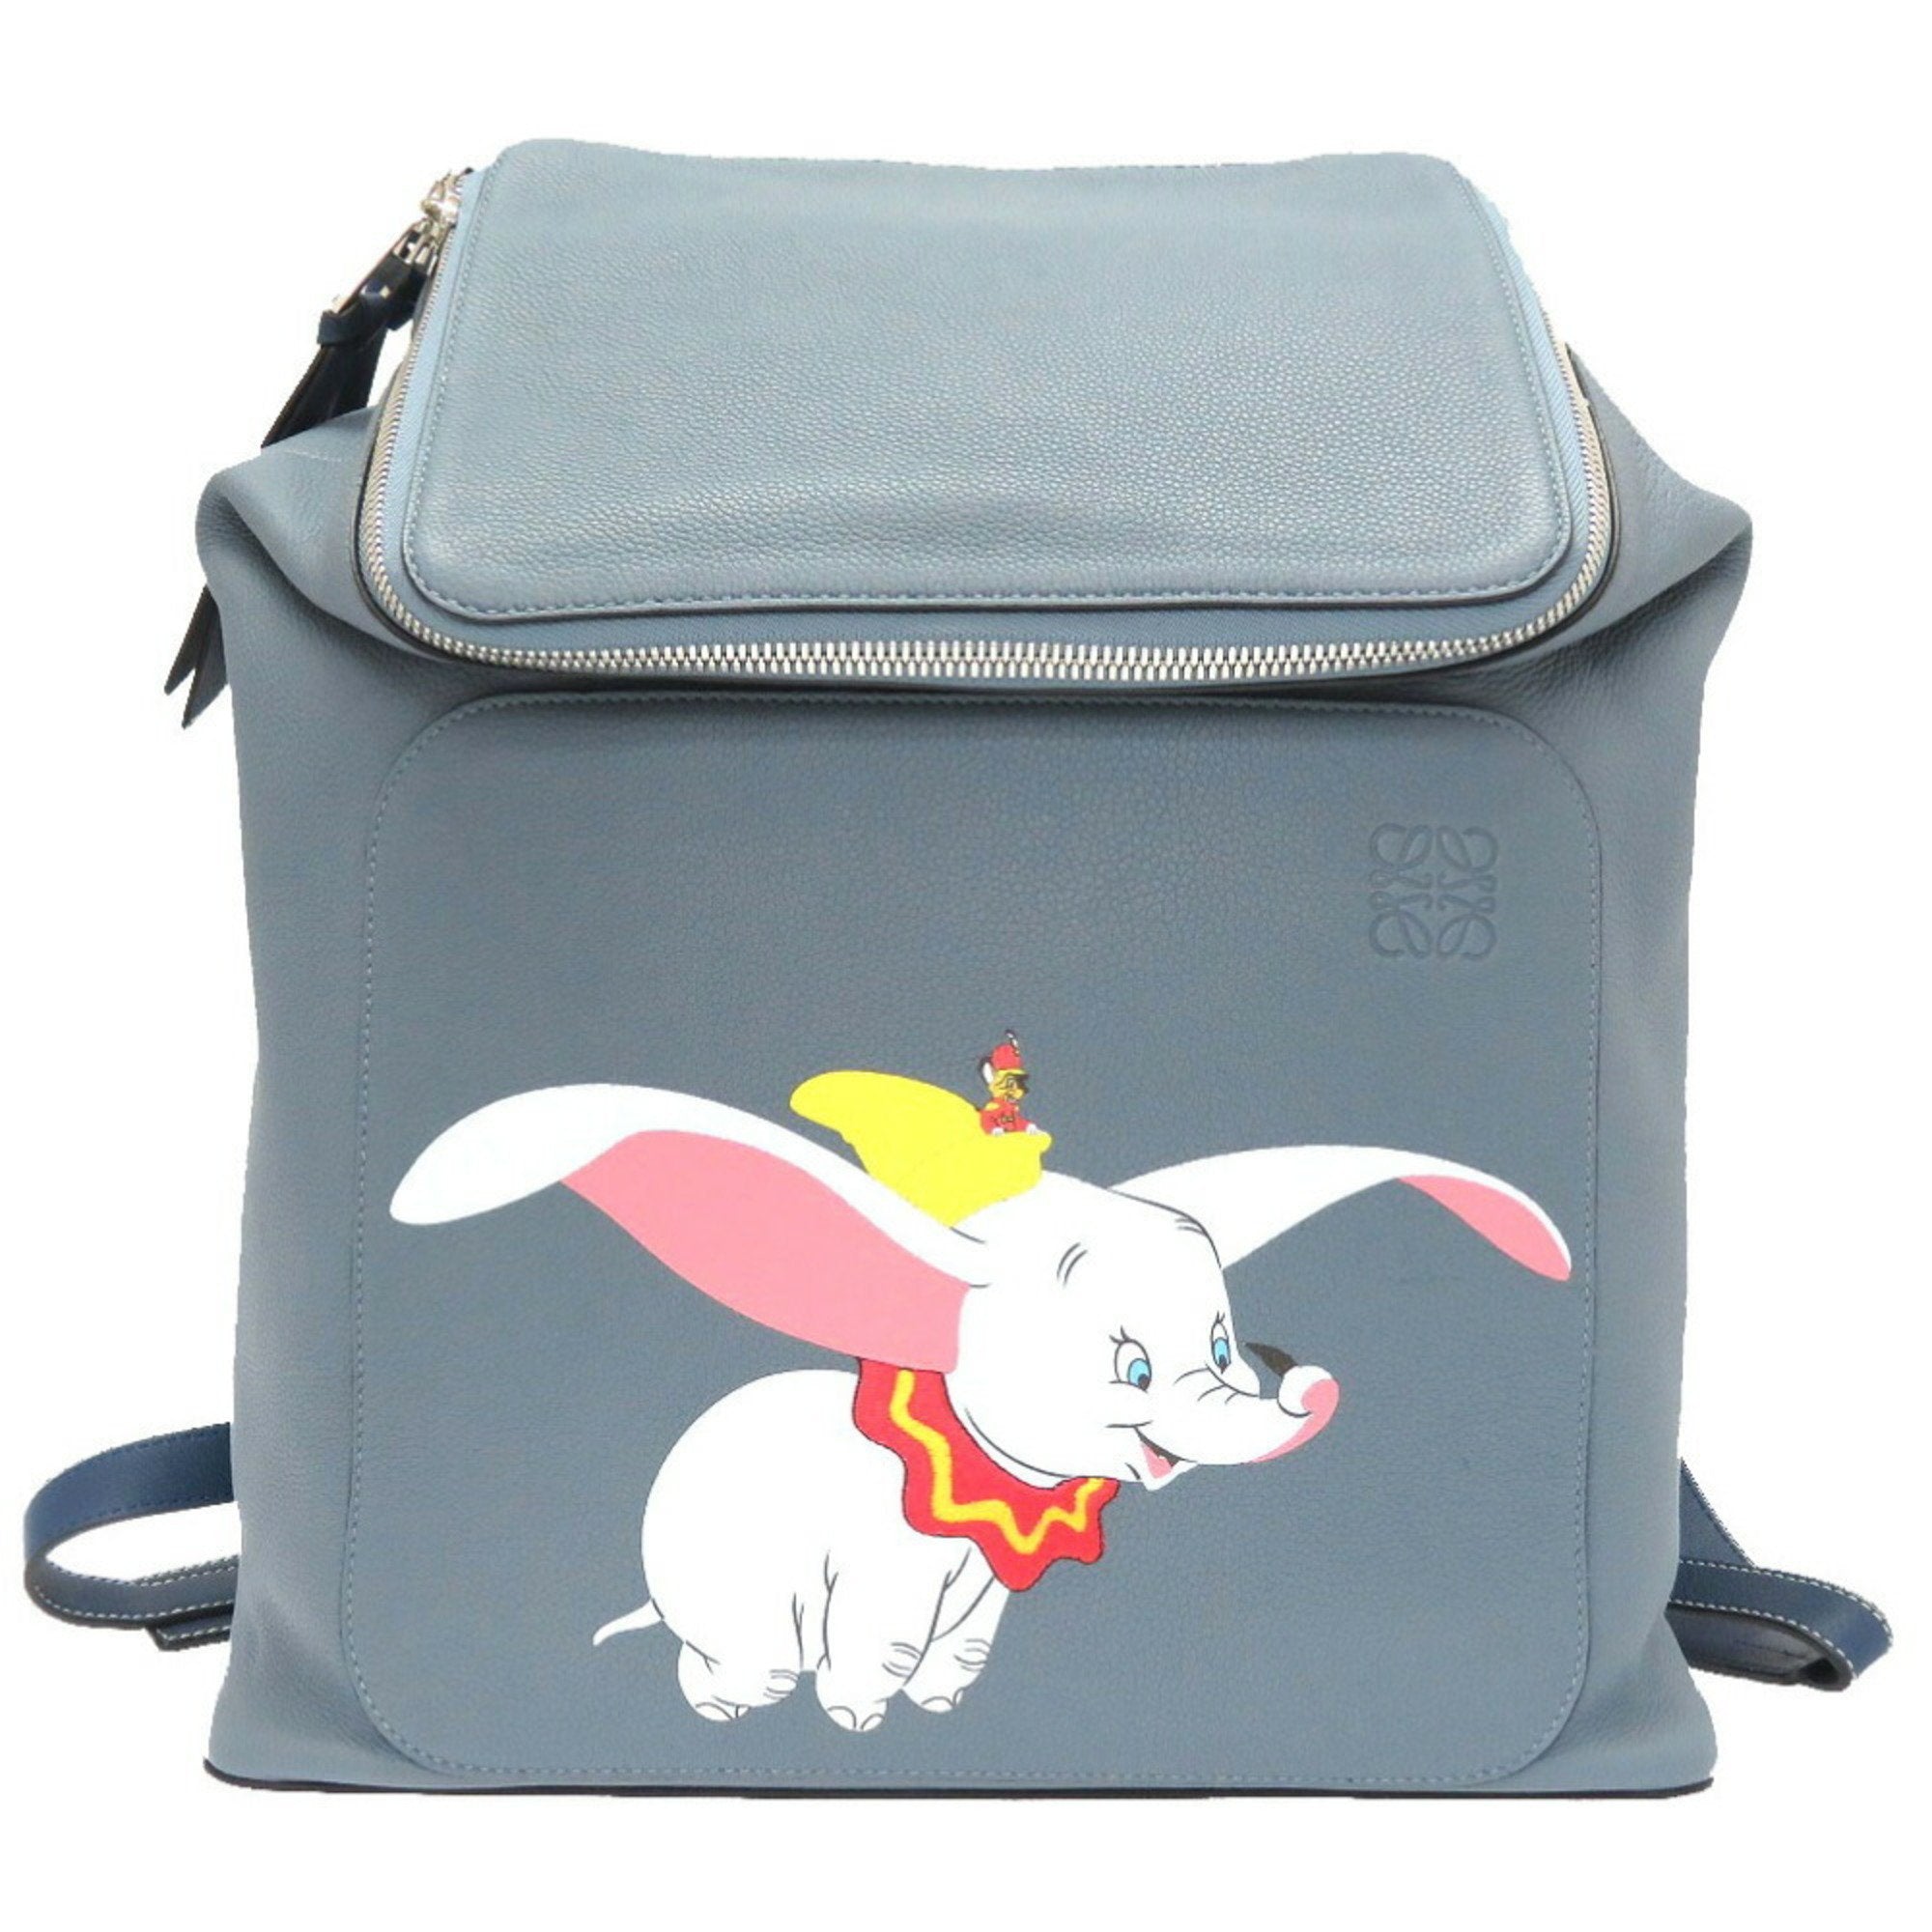 Dumbo Capsule Collection Leather Blue Rucksack Backpack Limited 0004